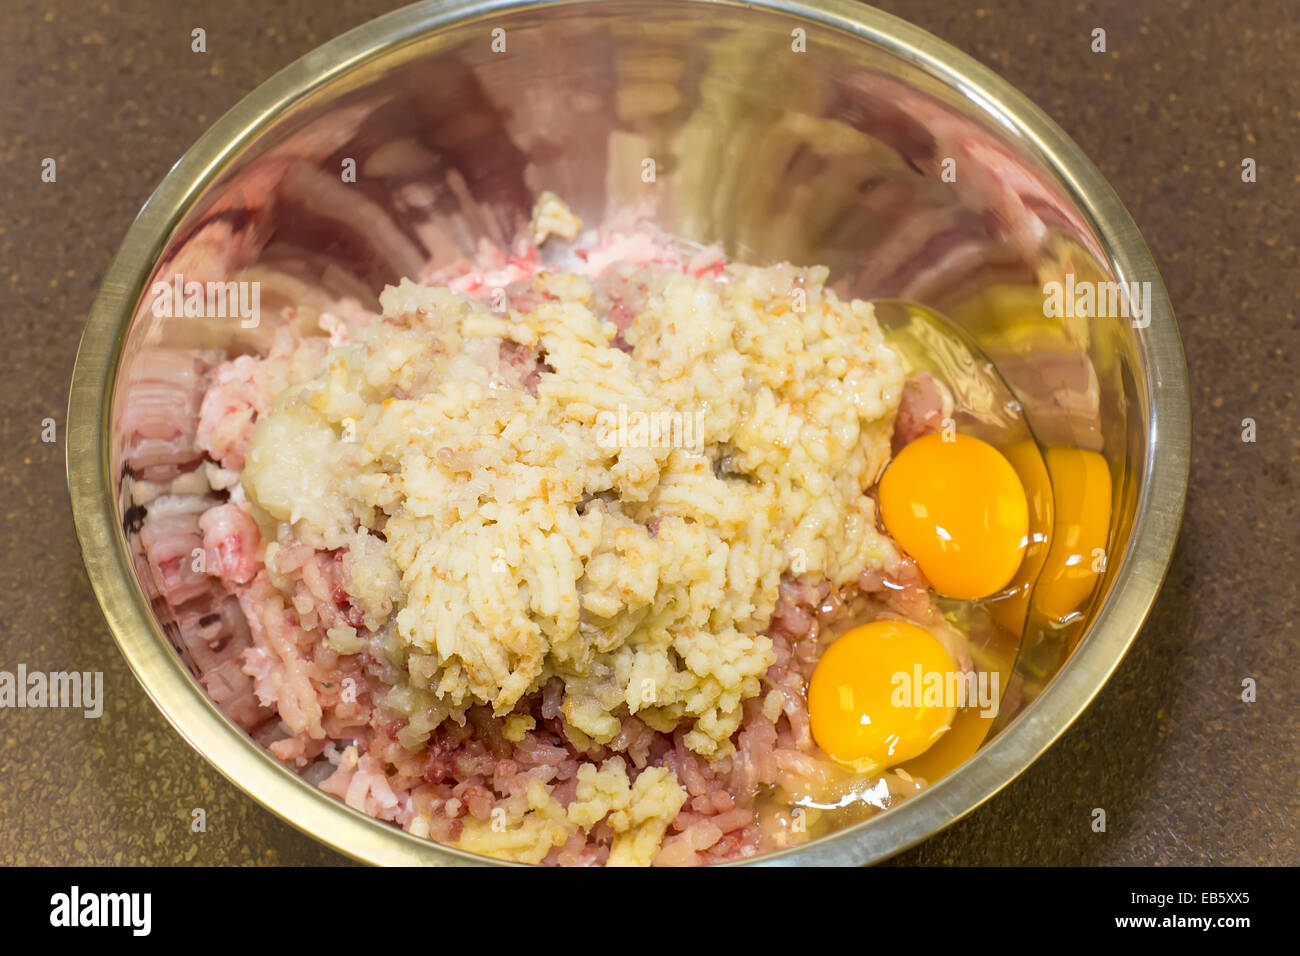 minced fish with eggs and bread Stock Photo